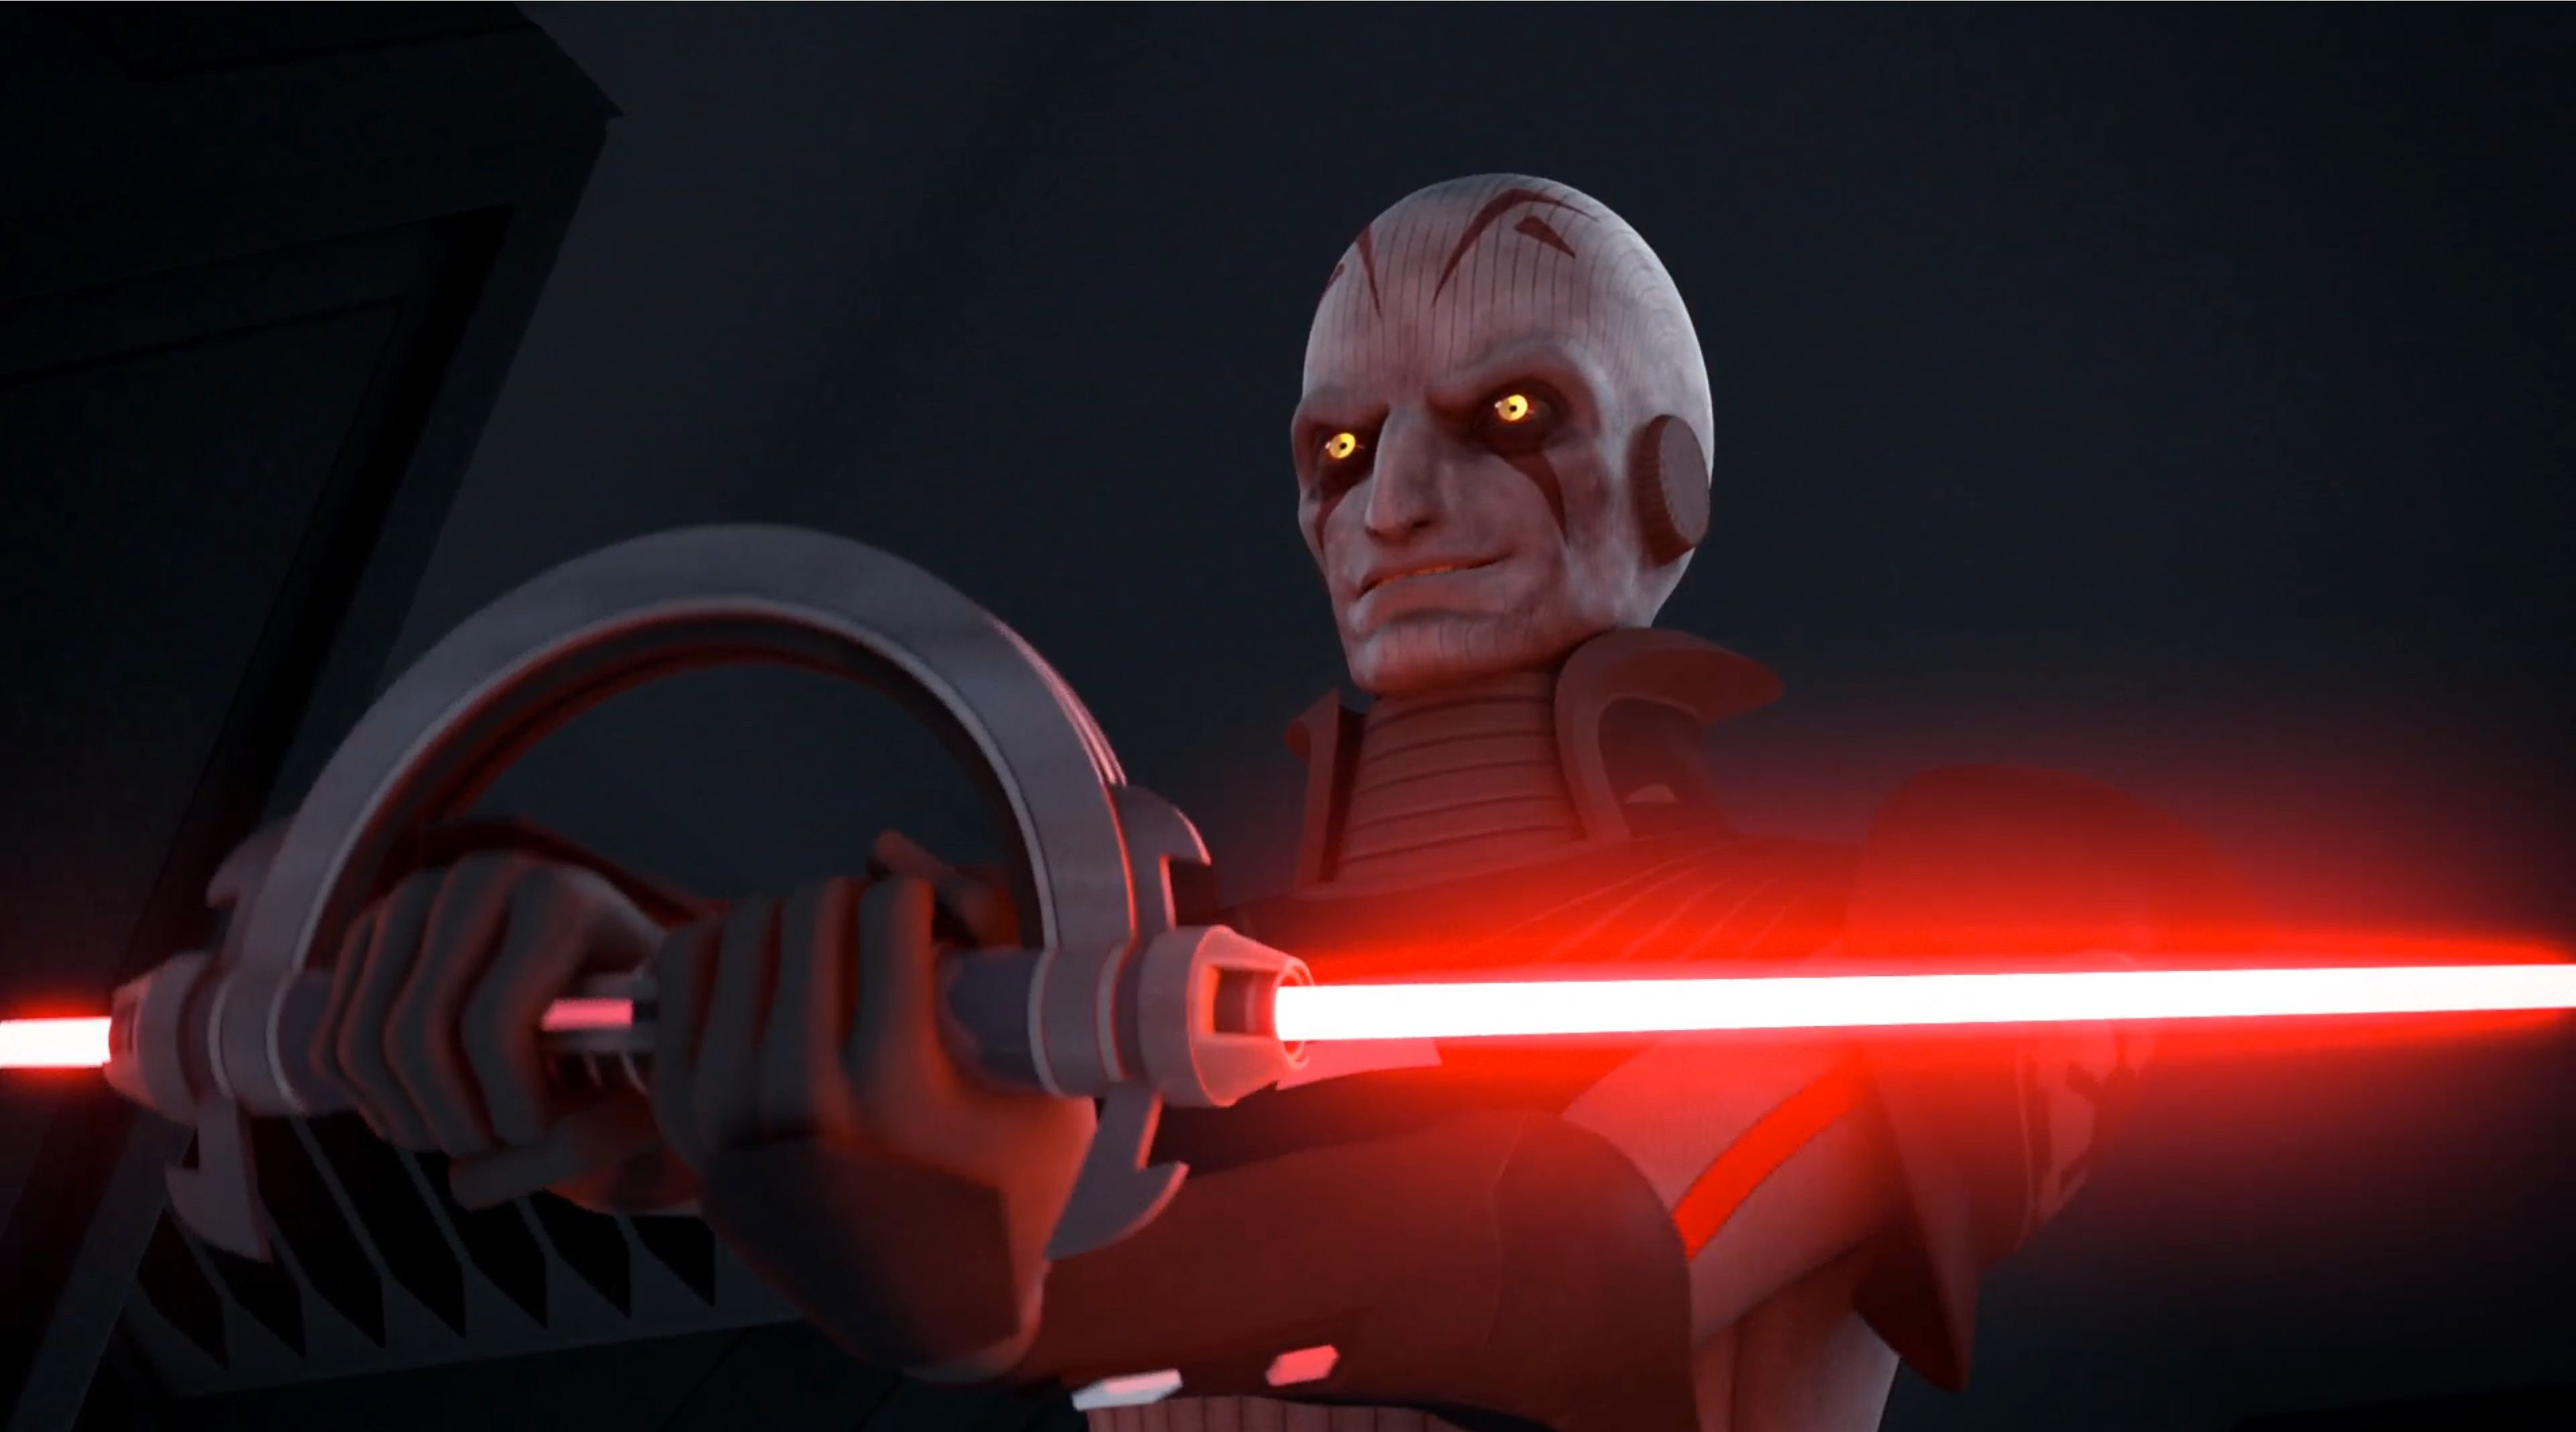 The Grand Inquisitor with his double-bladed lightsaber in Star Wars Rebels